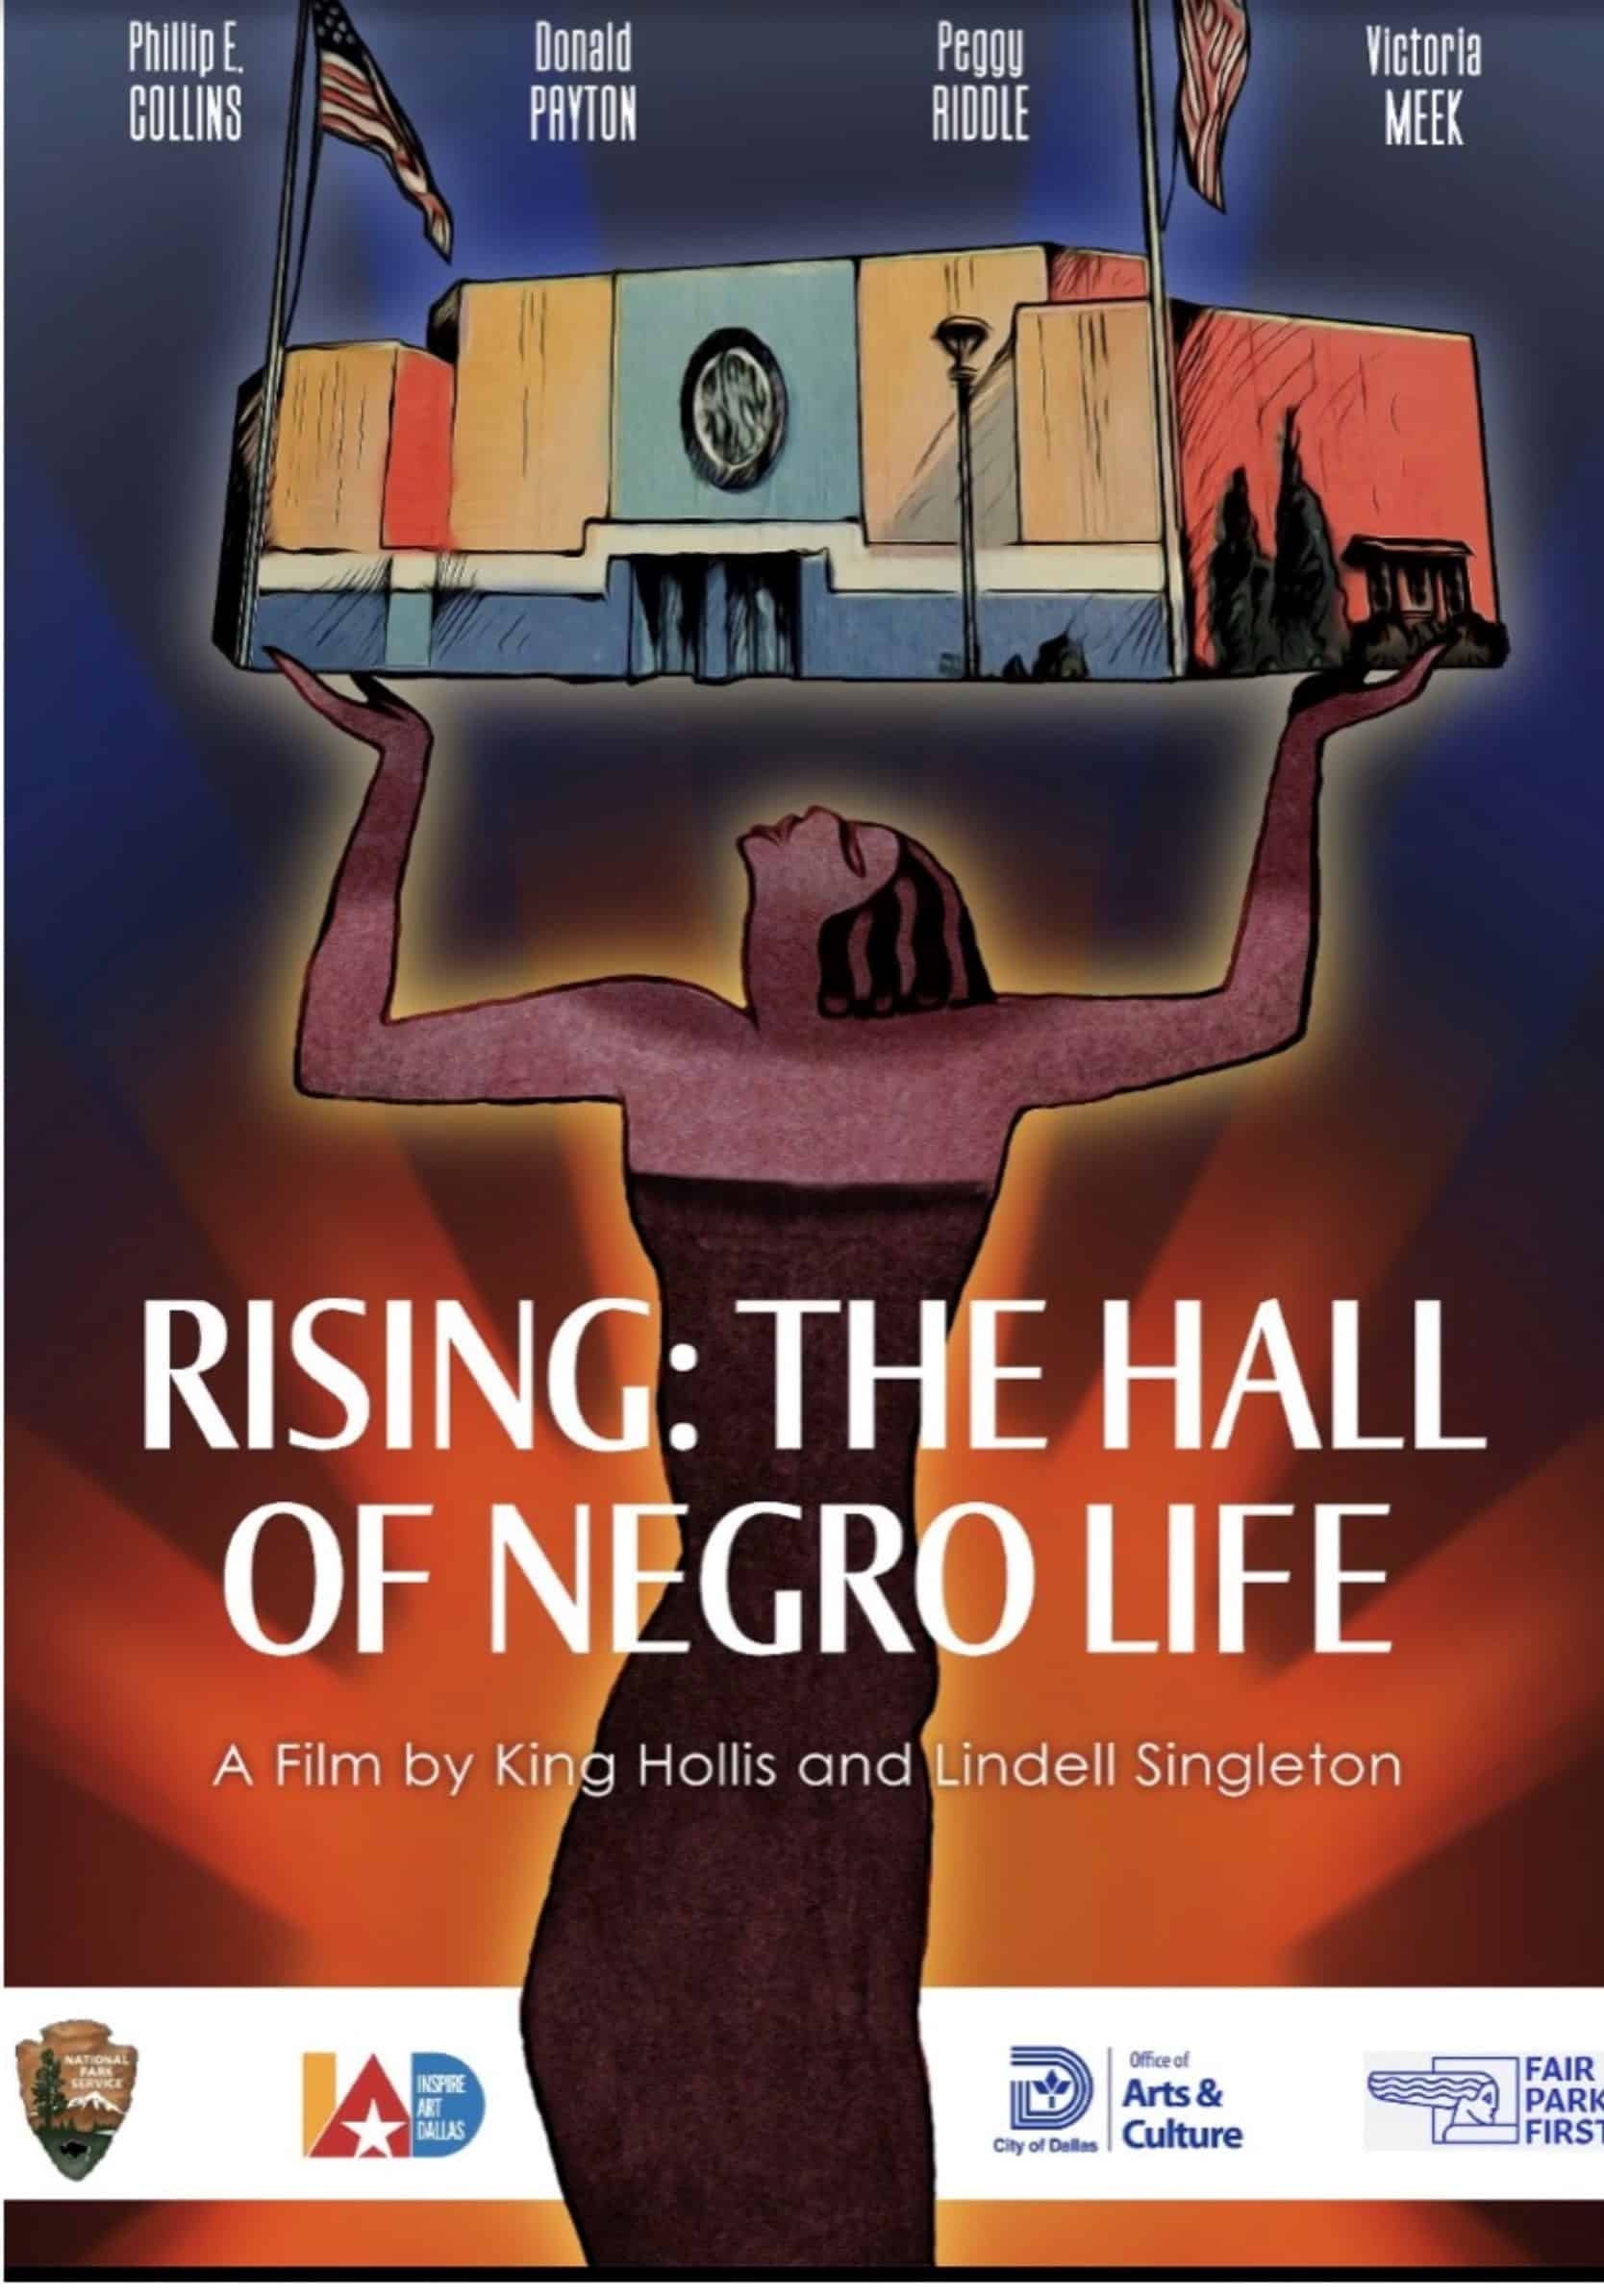 Film Screening & Discussion - Rising: The Hall of Negro Life